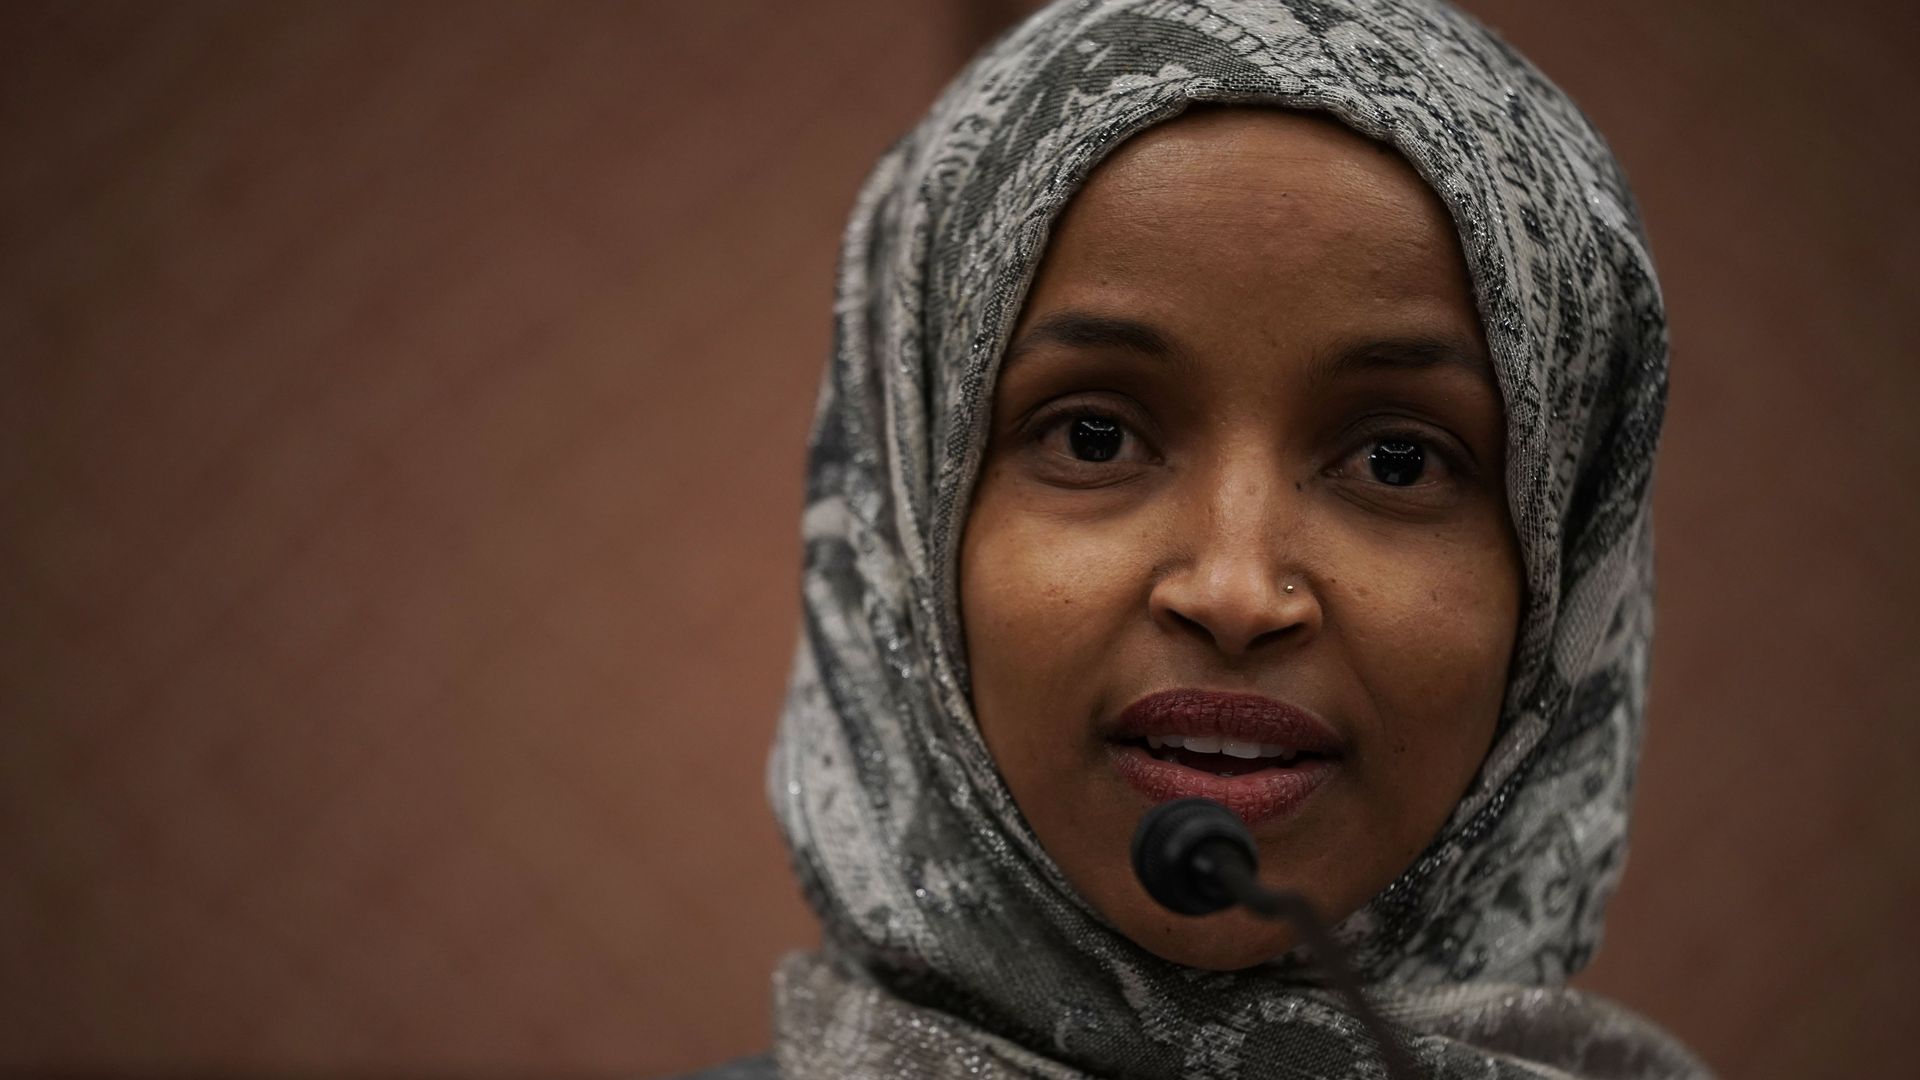 Ilhan Omar was accused of being anti-Semitic after making comments about Israel.